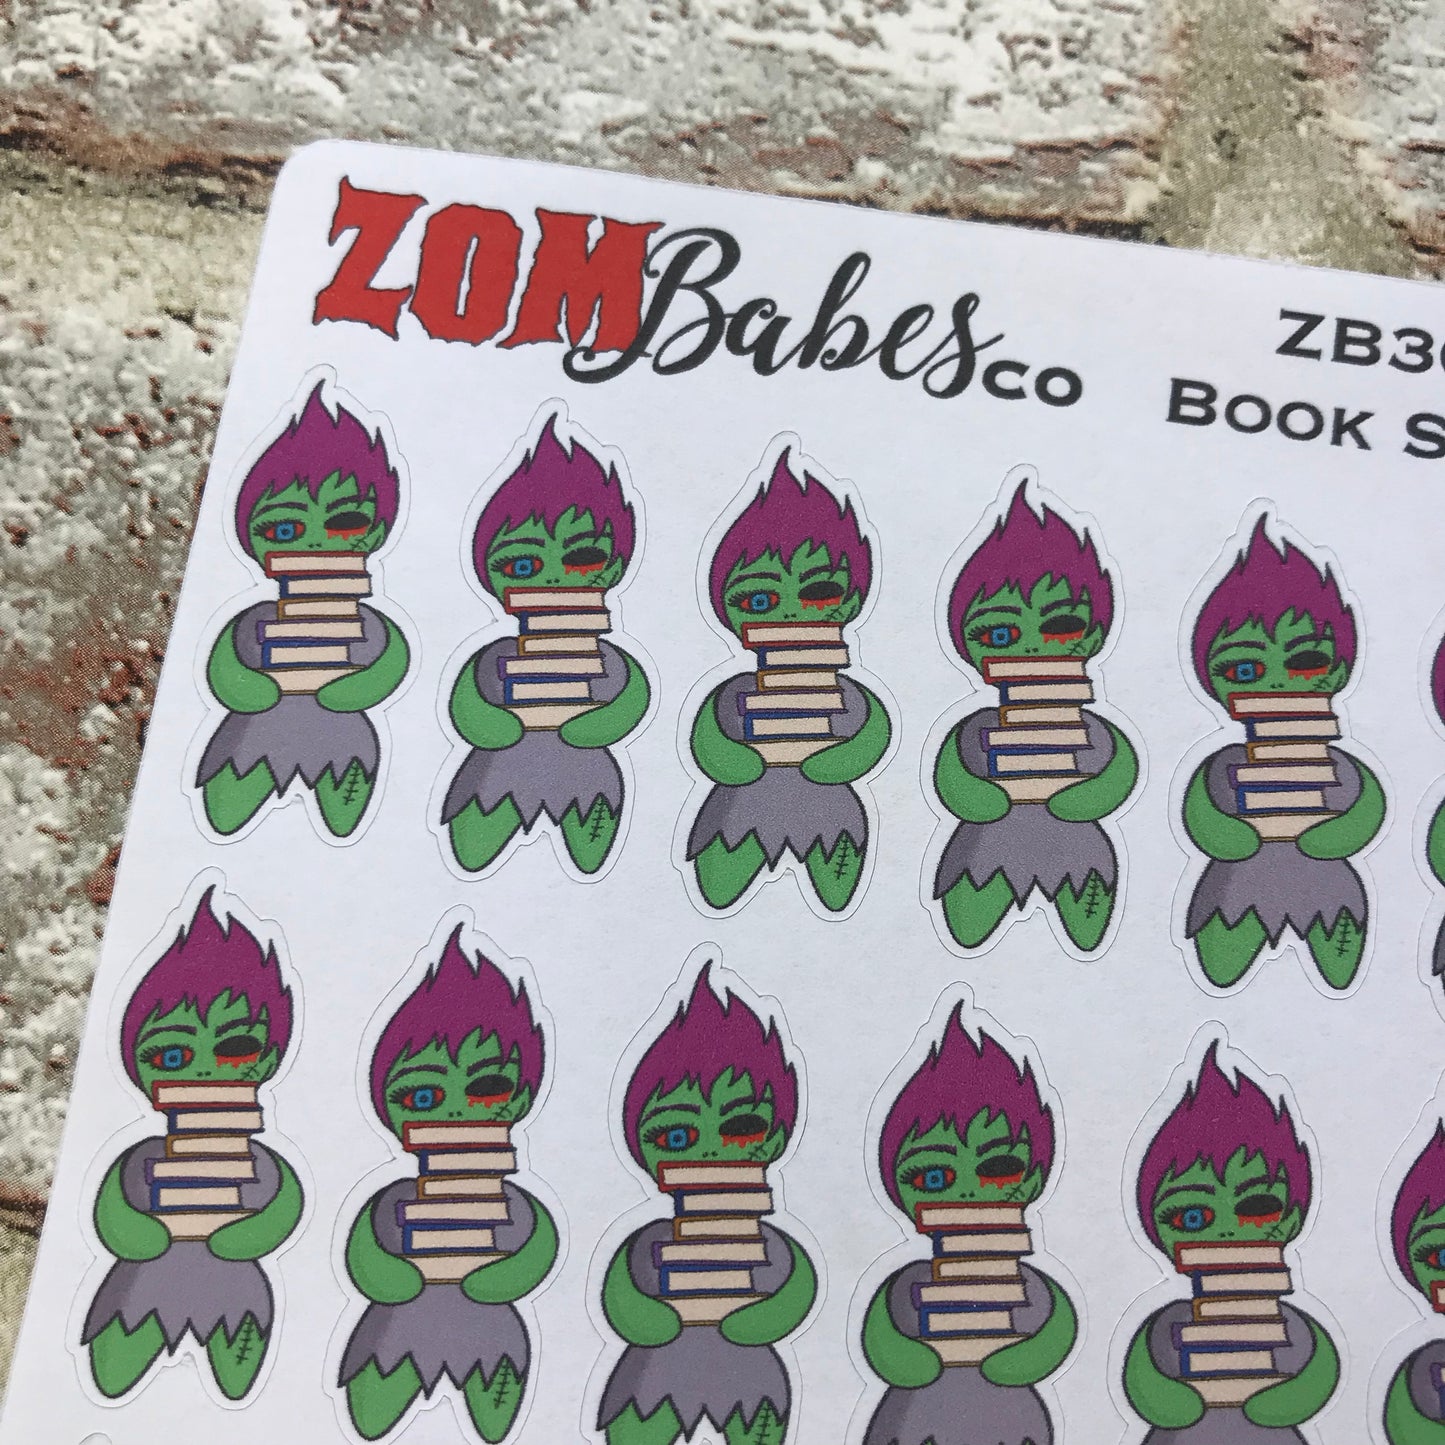 Book stack / Reading / Study Zombabe stickers (ZB30)